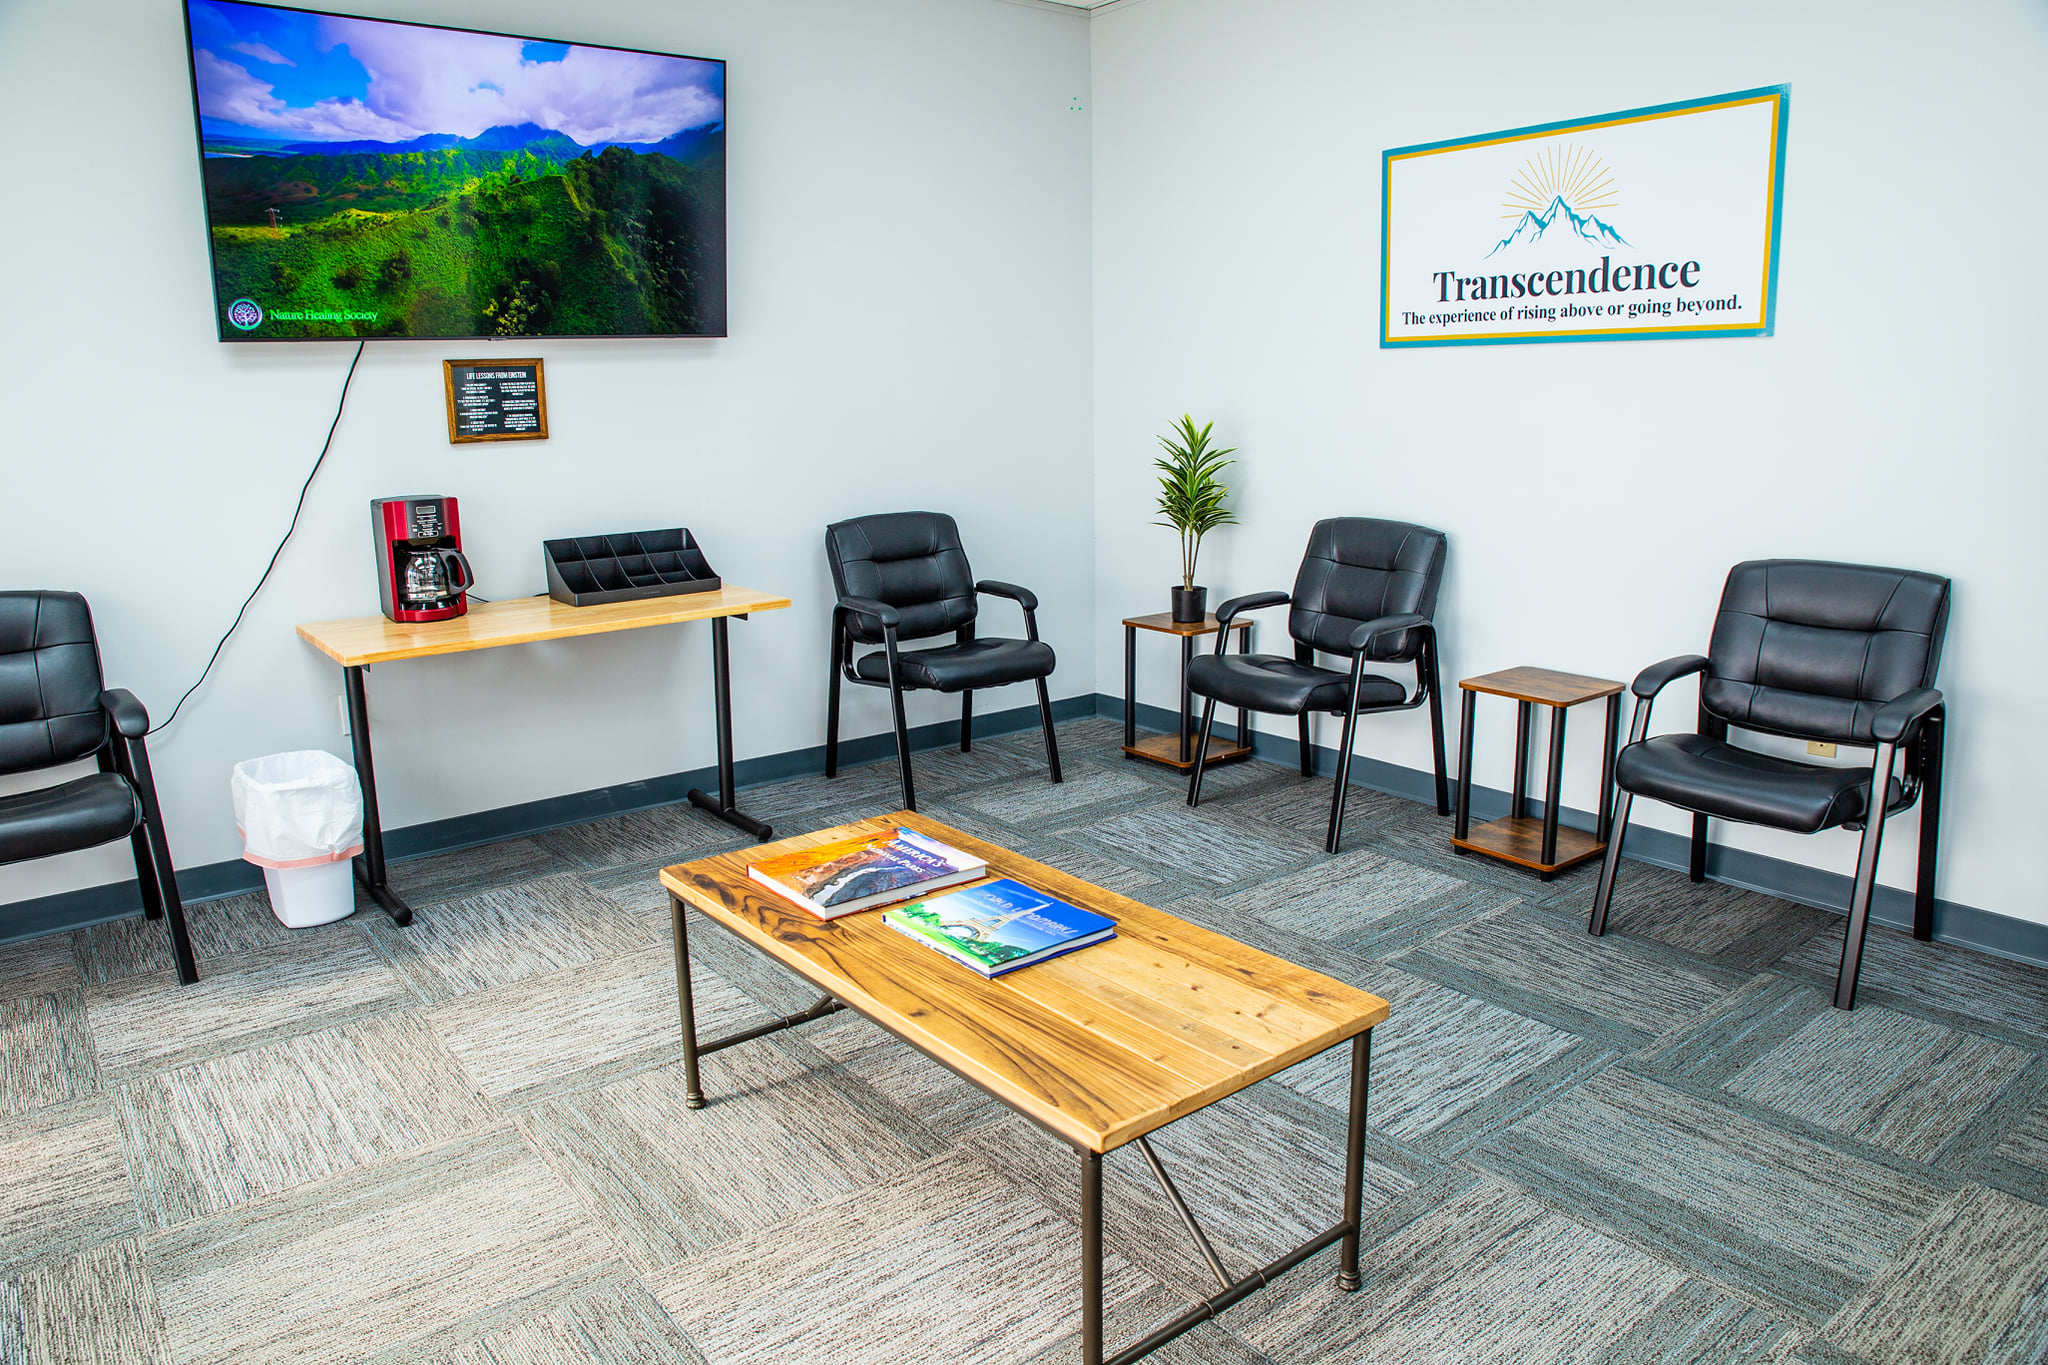 Transcendence Treatment Center opens its doors with the hopes to make a positive impact on those addicted to drugs and alcohol.